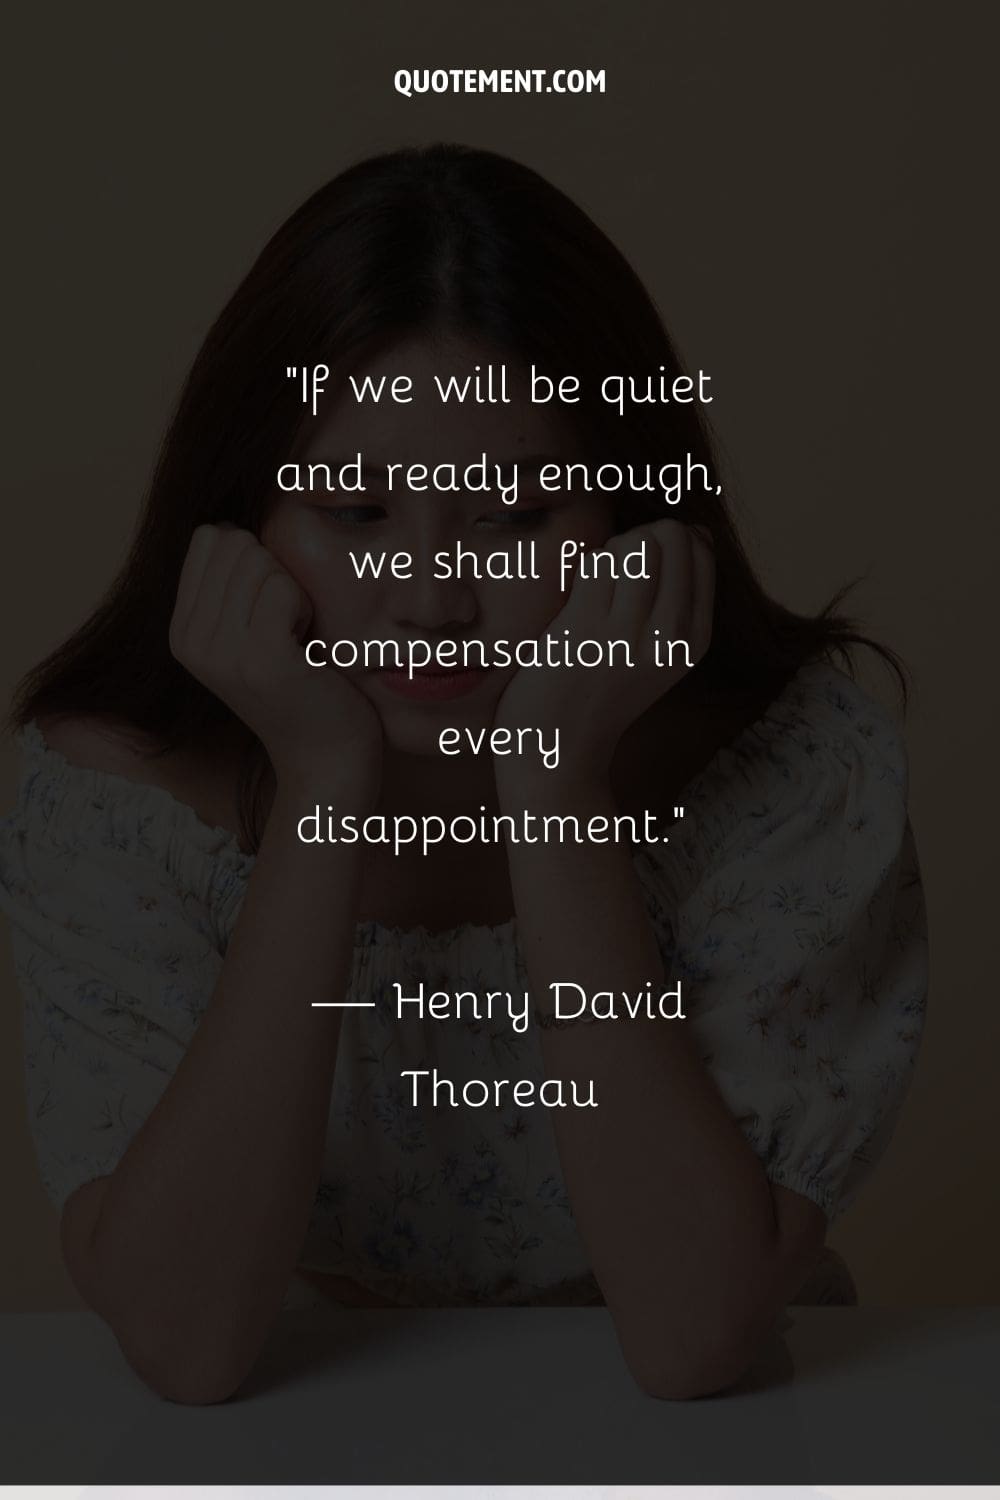 If we will be quiet and ready enough, we shall find compensation in every disappointment